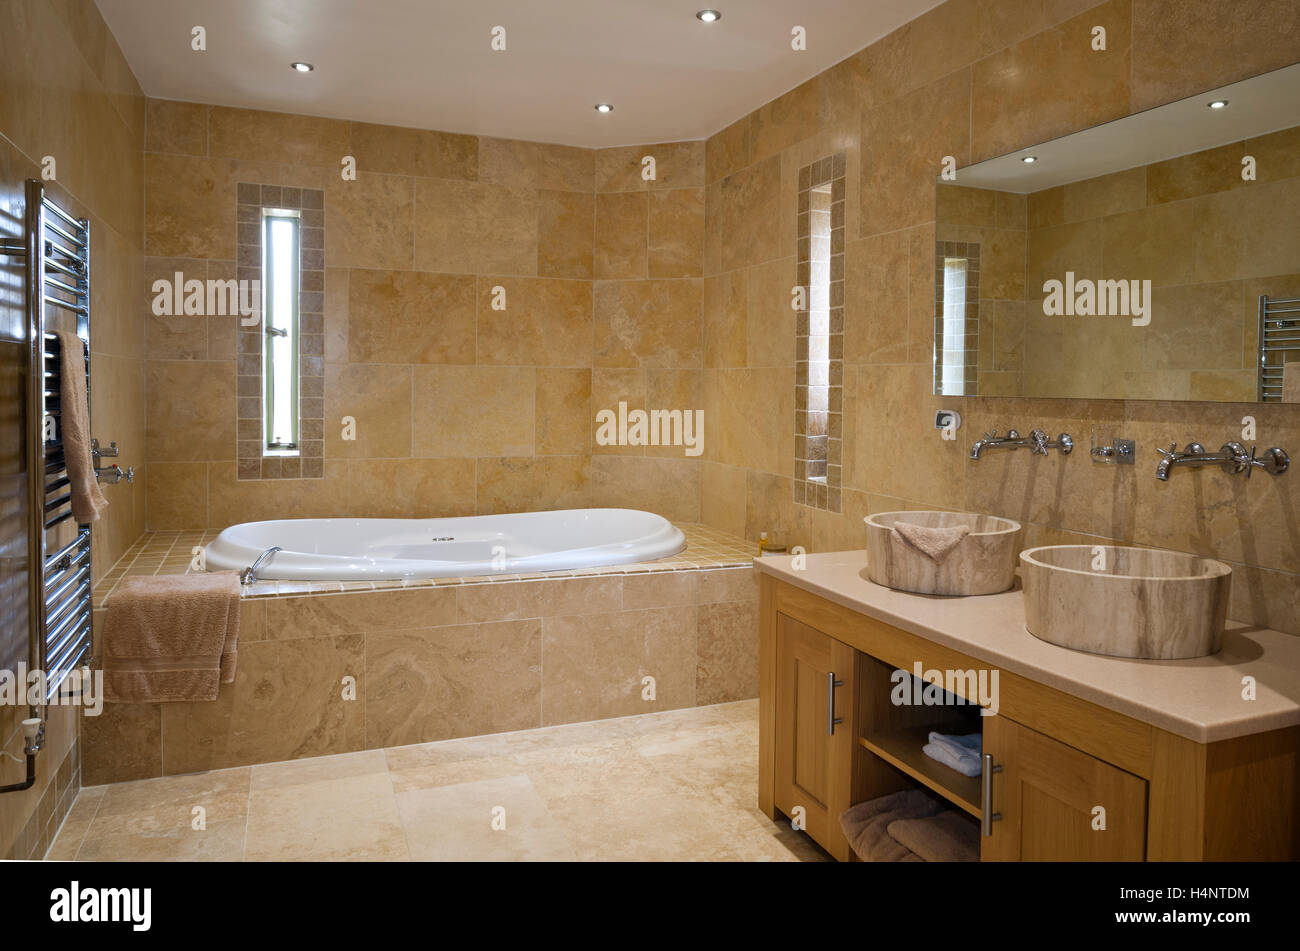 A luxury tiled bathroom with his and hers wash basins Stock Photo